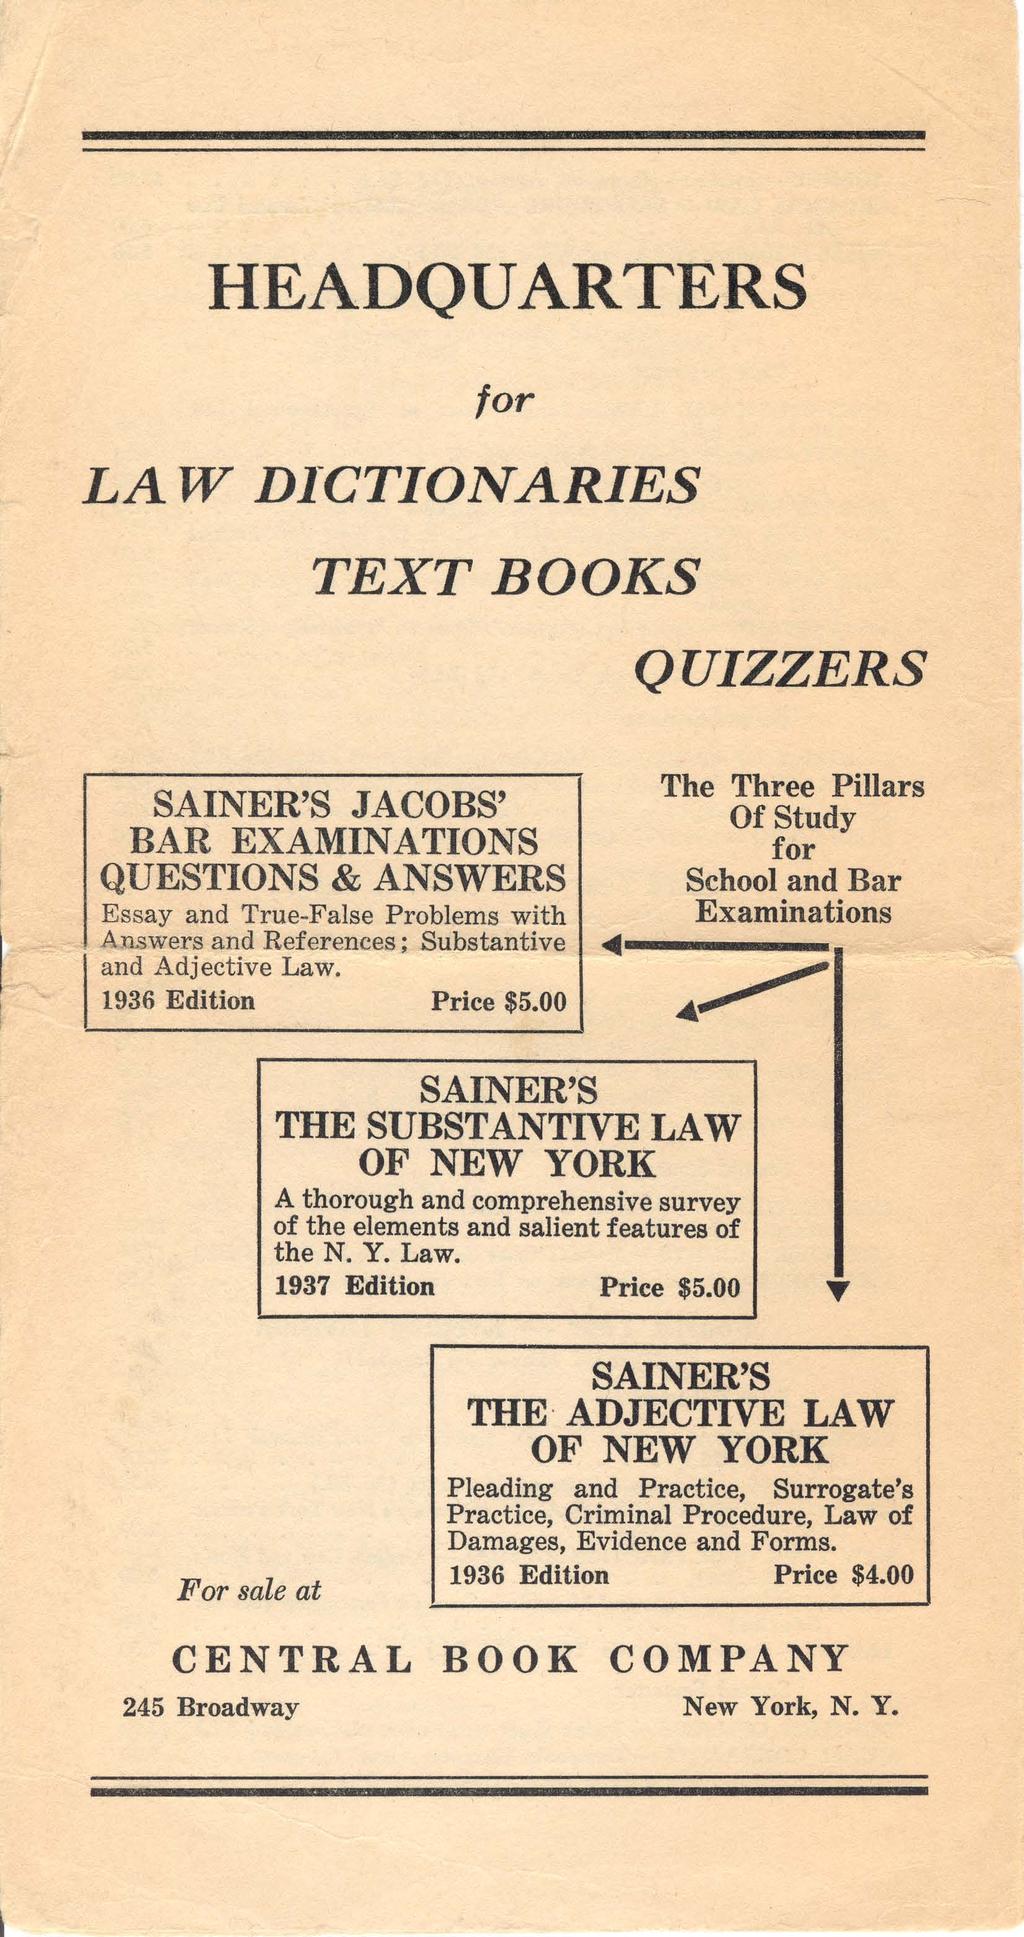 HEADQUARTERS for LA W DICTIONARIES TEXTBOOKS QUIZZERS I SAINER'S JACOBS' BAR EXAMINATIONS QUESTIONS & ANSWERS Essay and True-False Problems with A nswers and References; Substantive and Adjective Law.